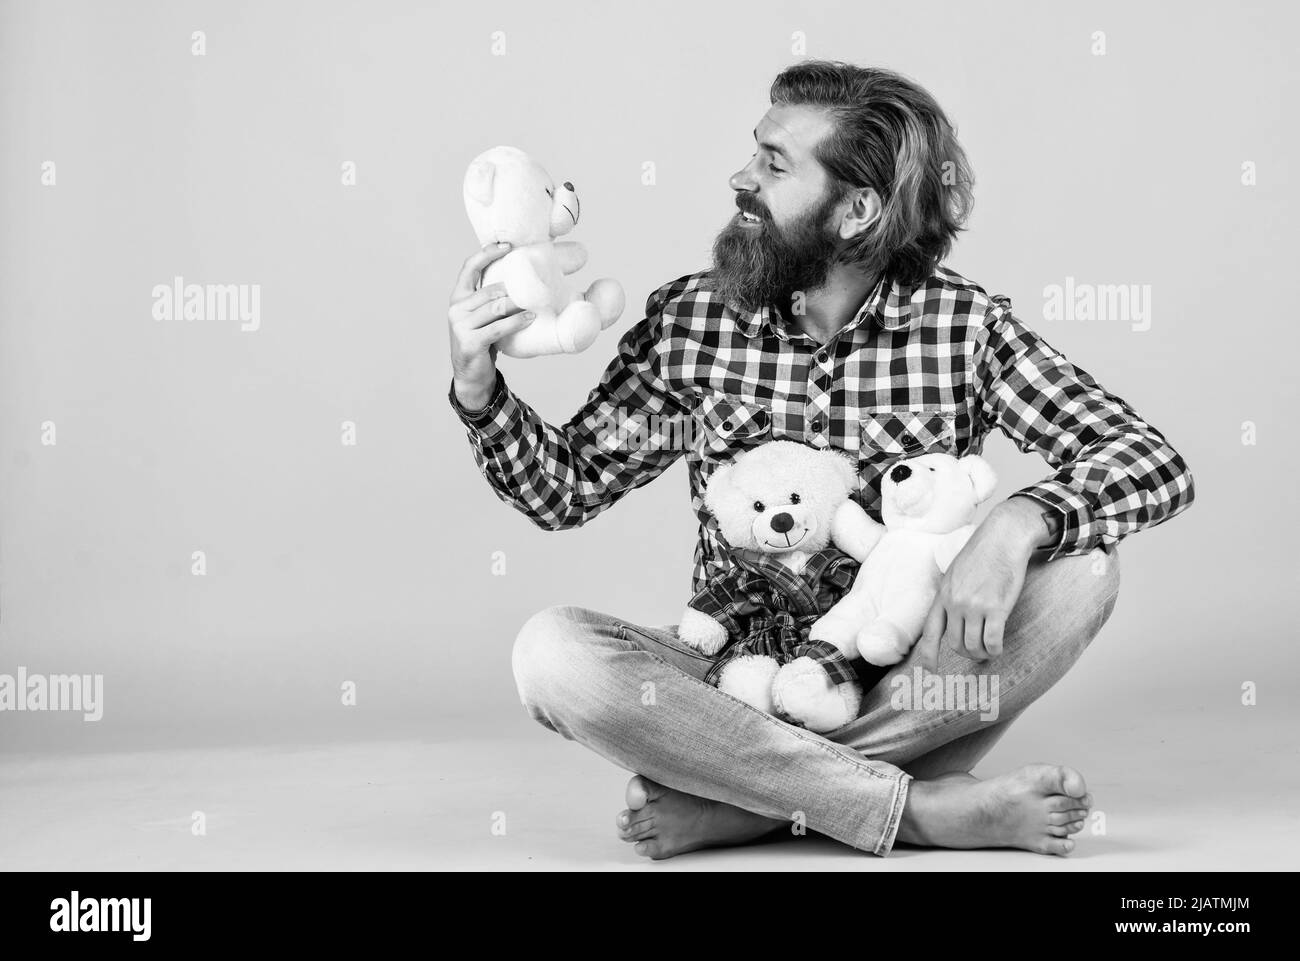 brutal bearded man wear checkered shirt having lush beard and moustache with teddy bear toy, toy shop Stock Photo